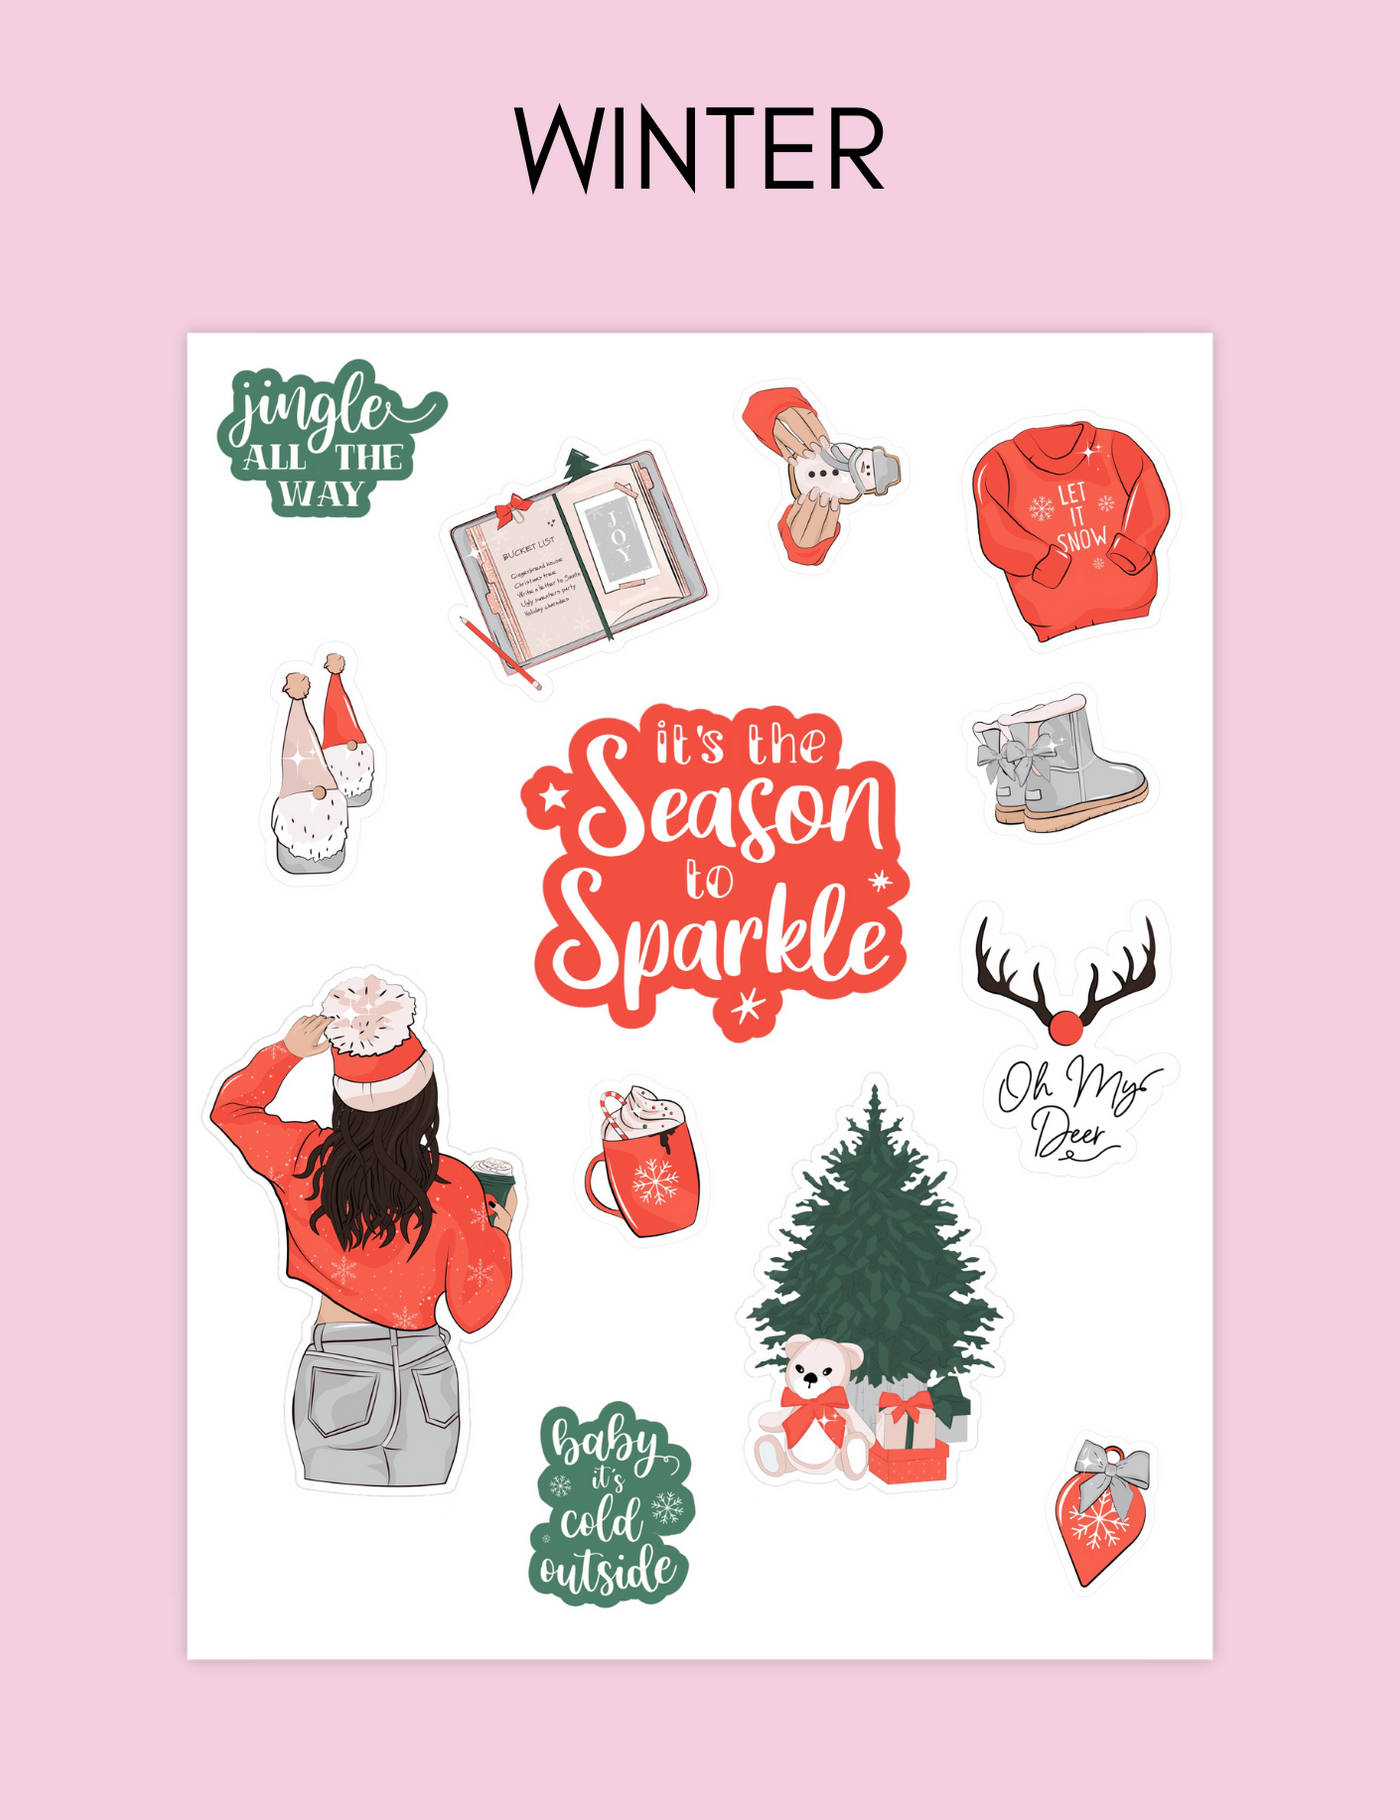 CHRISTMAS Digital Stickers for Goodnotes, Holidays Pre-cropped Digital  Planner Stickers, Bonus Stickers 